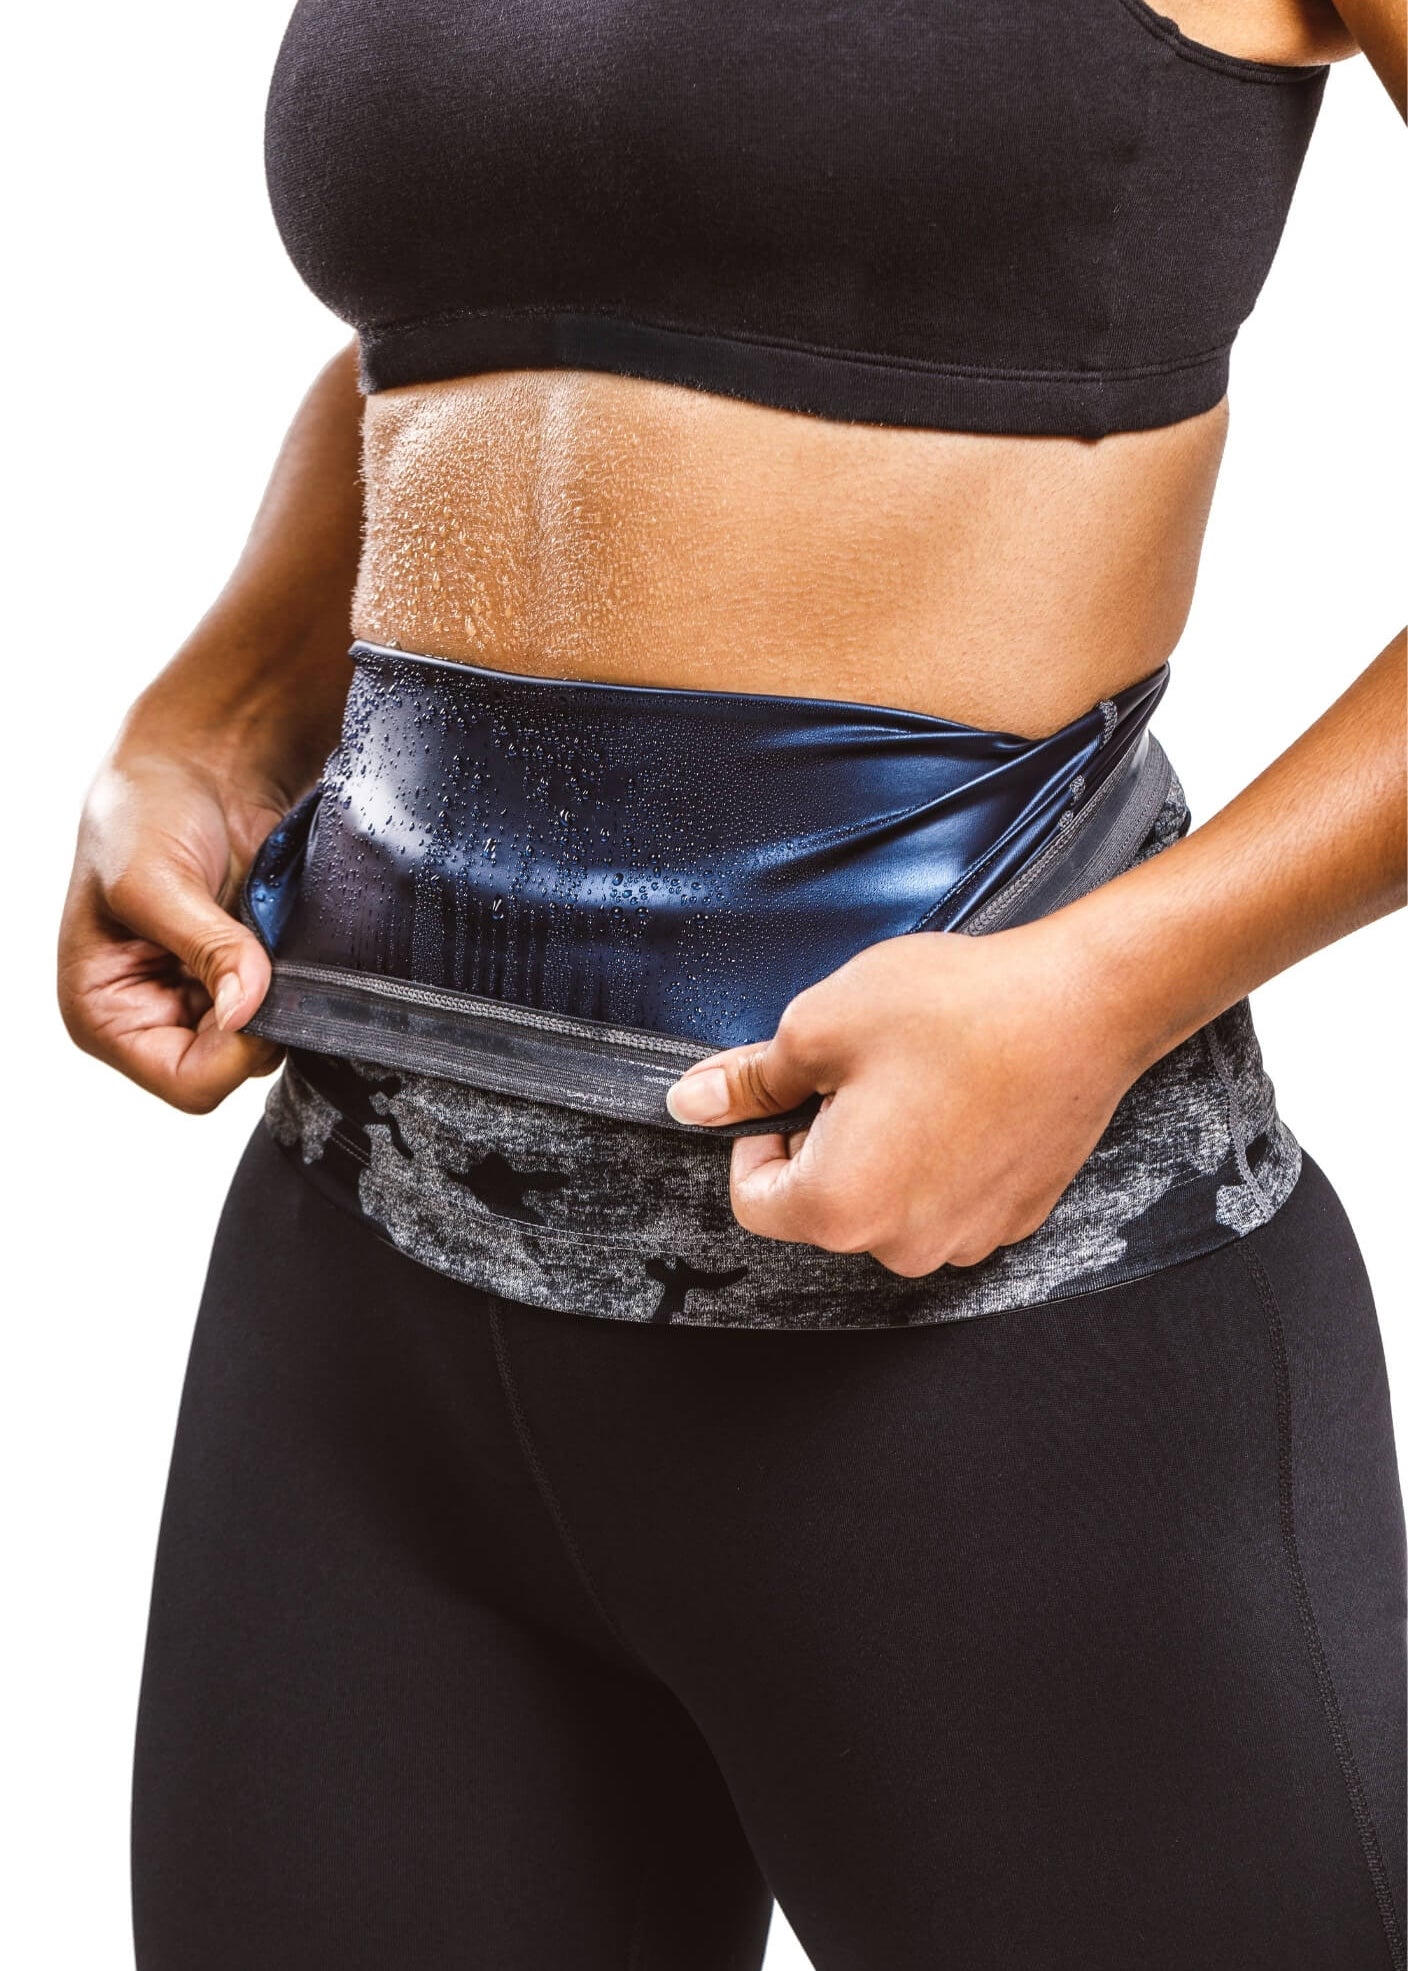 Compare prices for Sweat Shaper across all European  stores